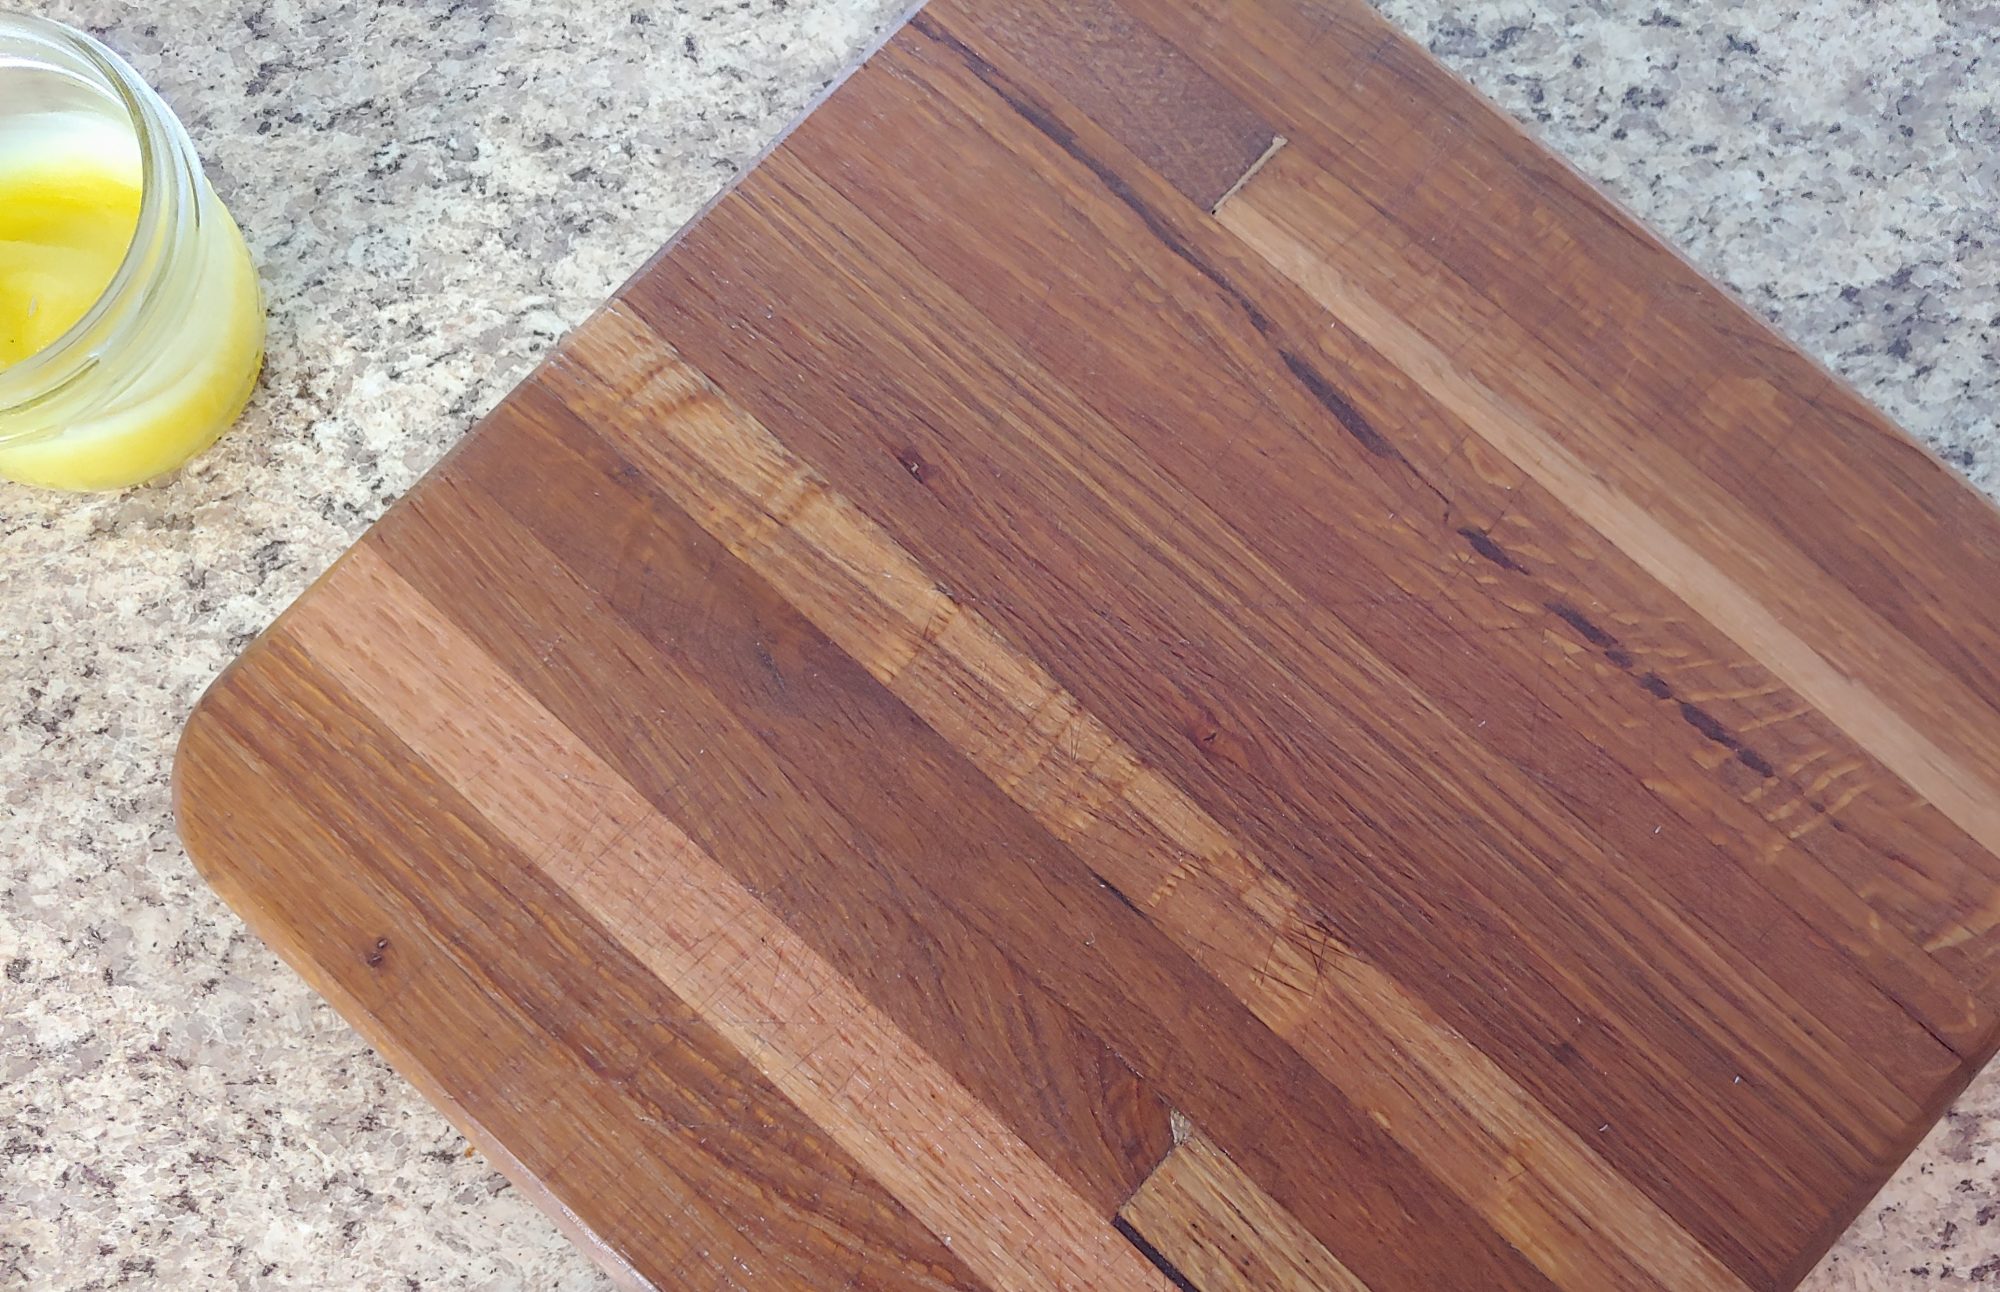 cleaning and seasoning wooden cutting boards